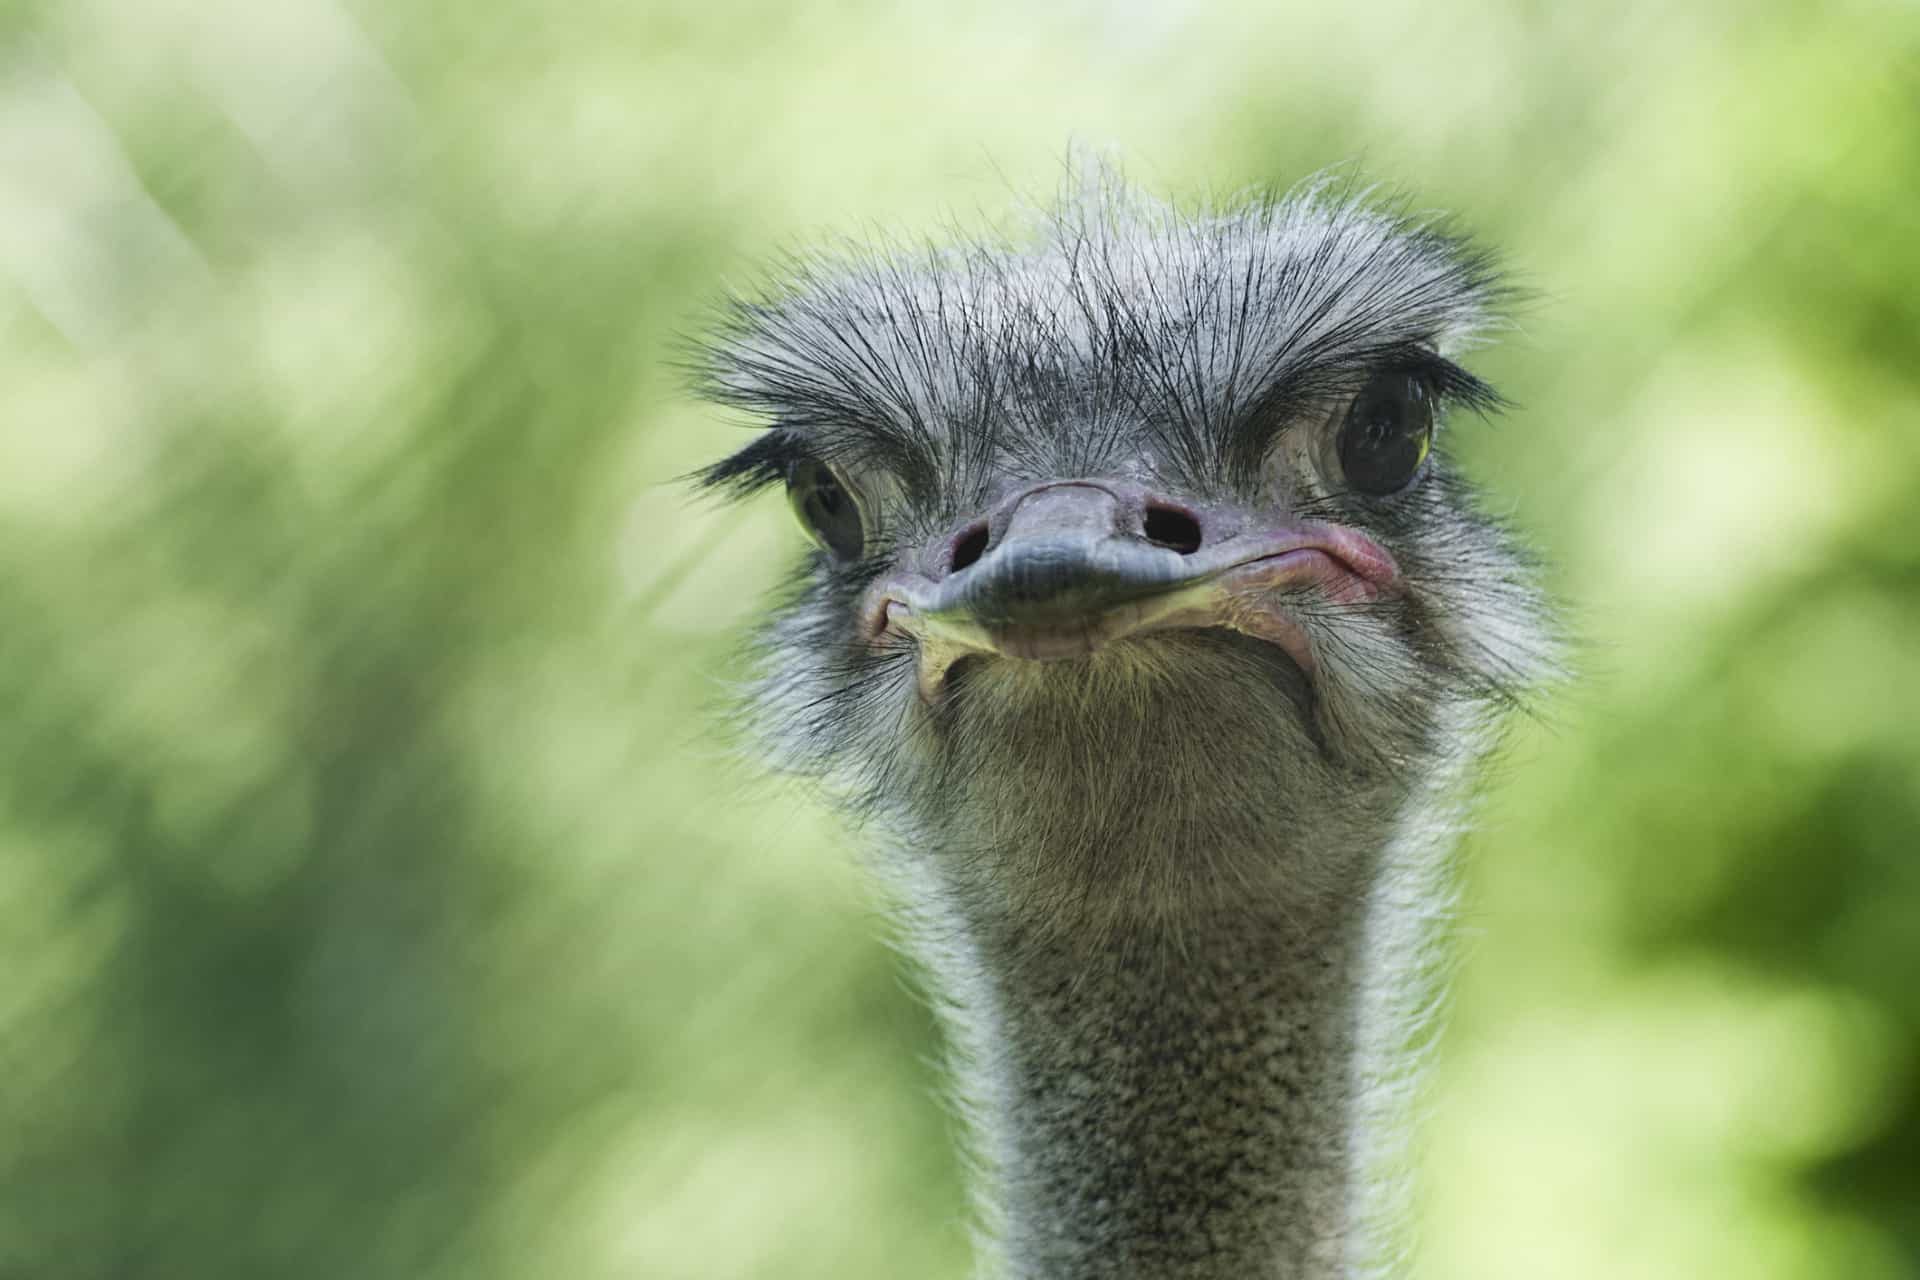 "Sexual predator EMU!!!! As my partner and I strolled around the CHILDREN'S SECTION of the <a href="https://uk.starsinsider.com/lifestyle/229437/the-wildest-zoo-animal-escapes-in-history" rel="noopener">zoo</a> an emu got a bit too friendly...I pushed it away and it decided to go ejaculate on some poor lady!"